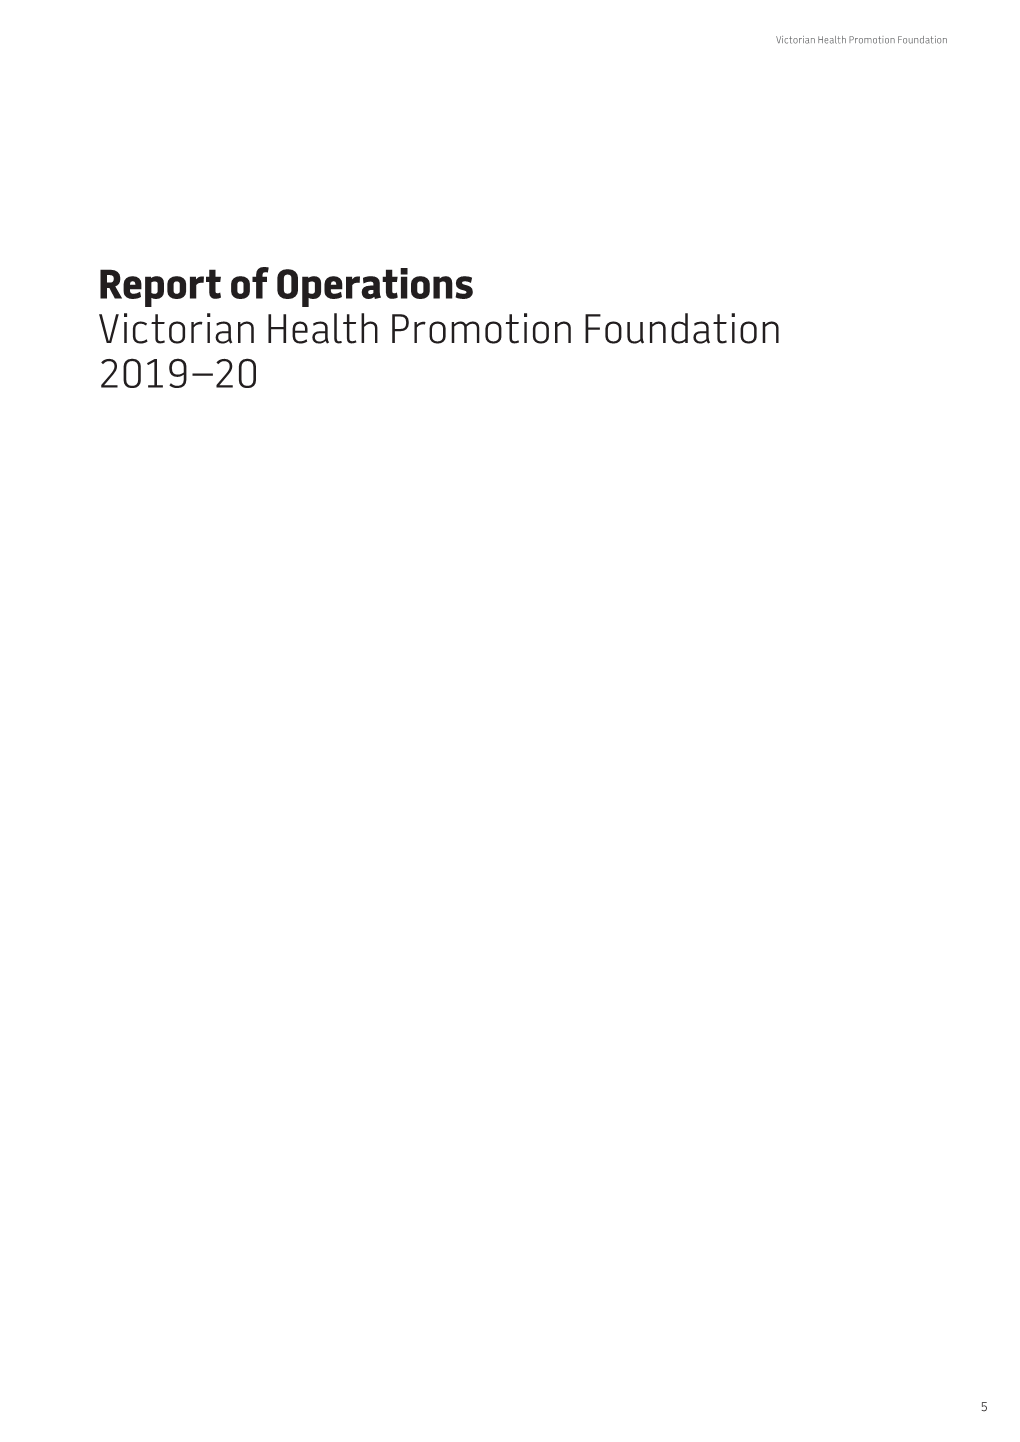 Report of Operations Victorian Health Promotion Foundation 2019–20